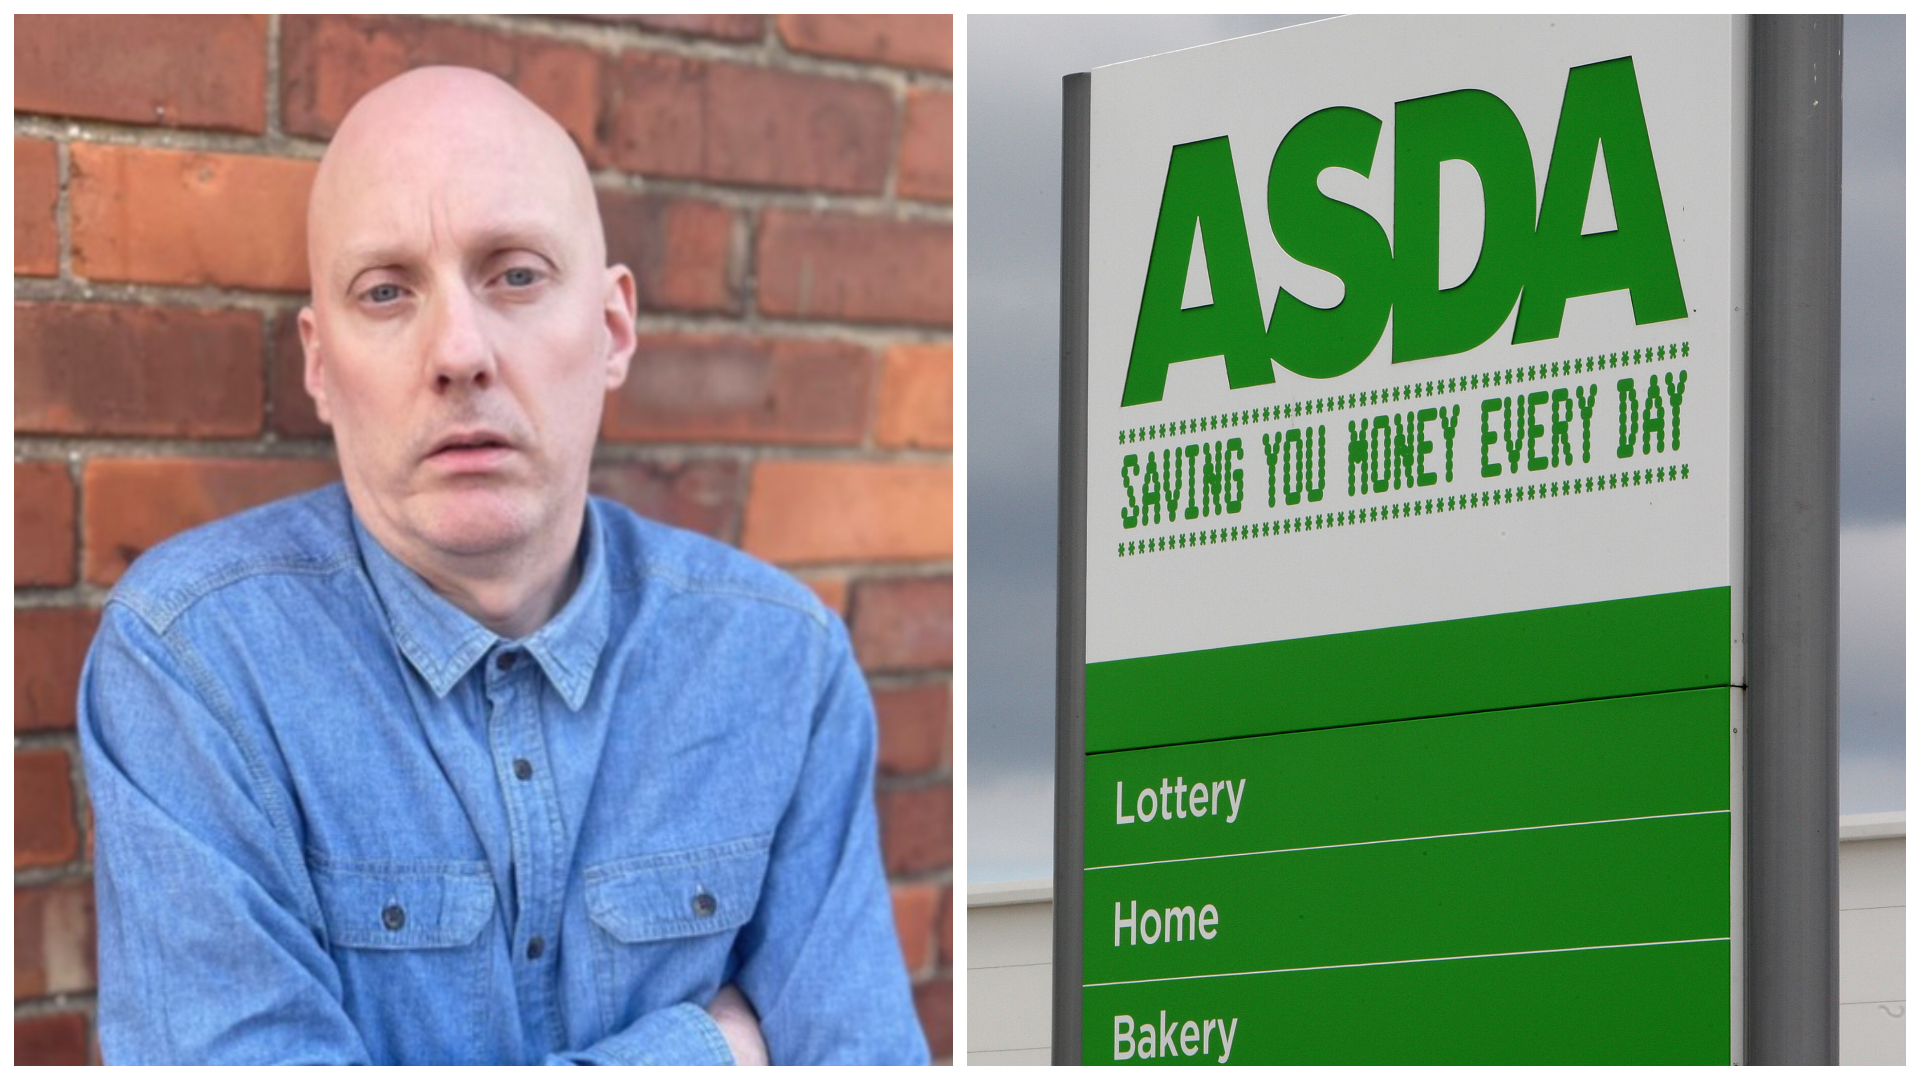 Mums are fuming at Asda after noticing 'annoying' problem with its  underwear offer - Kent Live